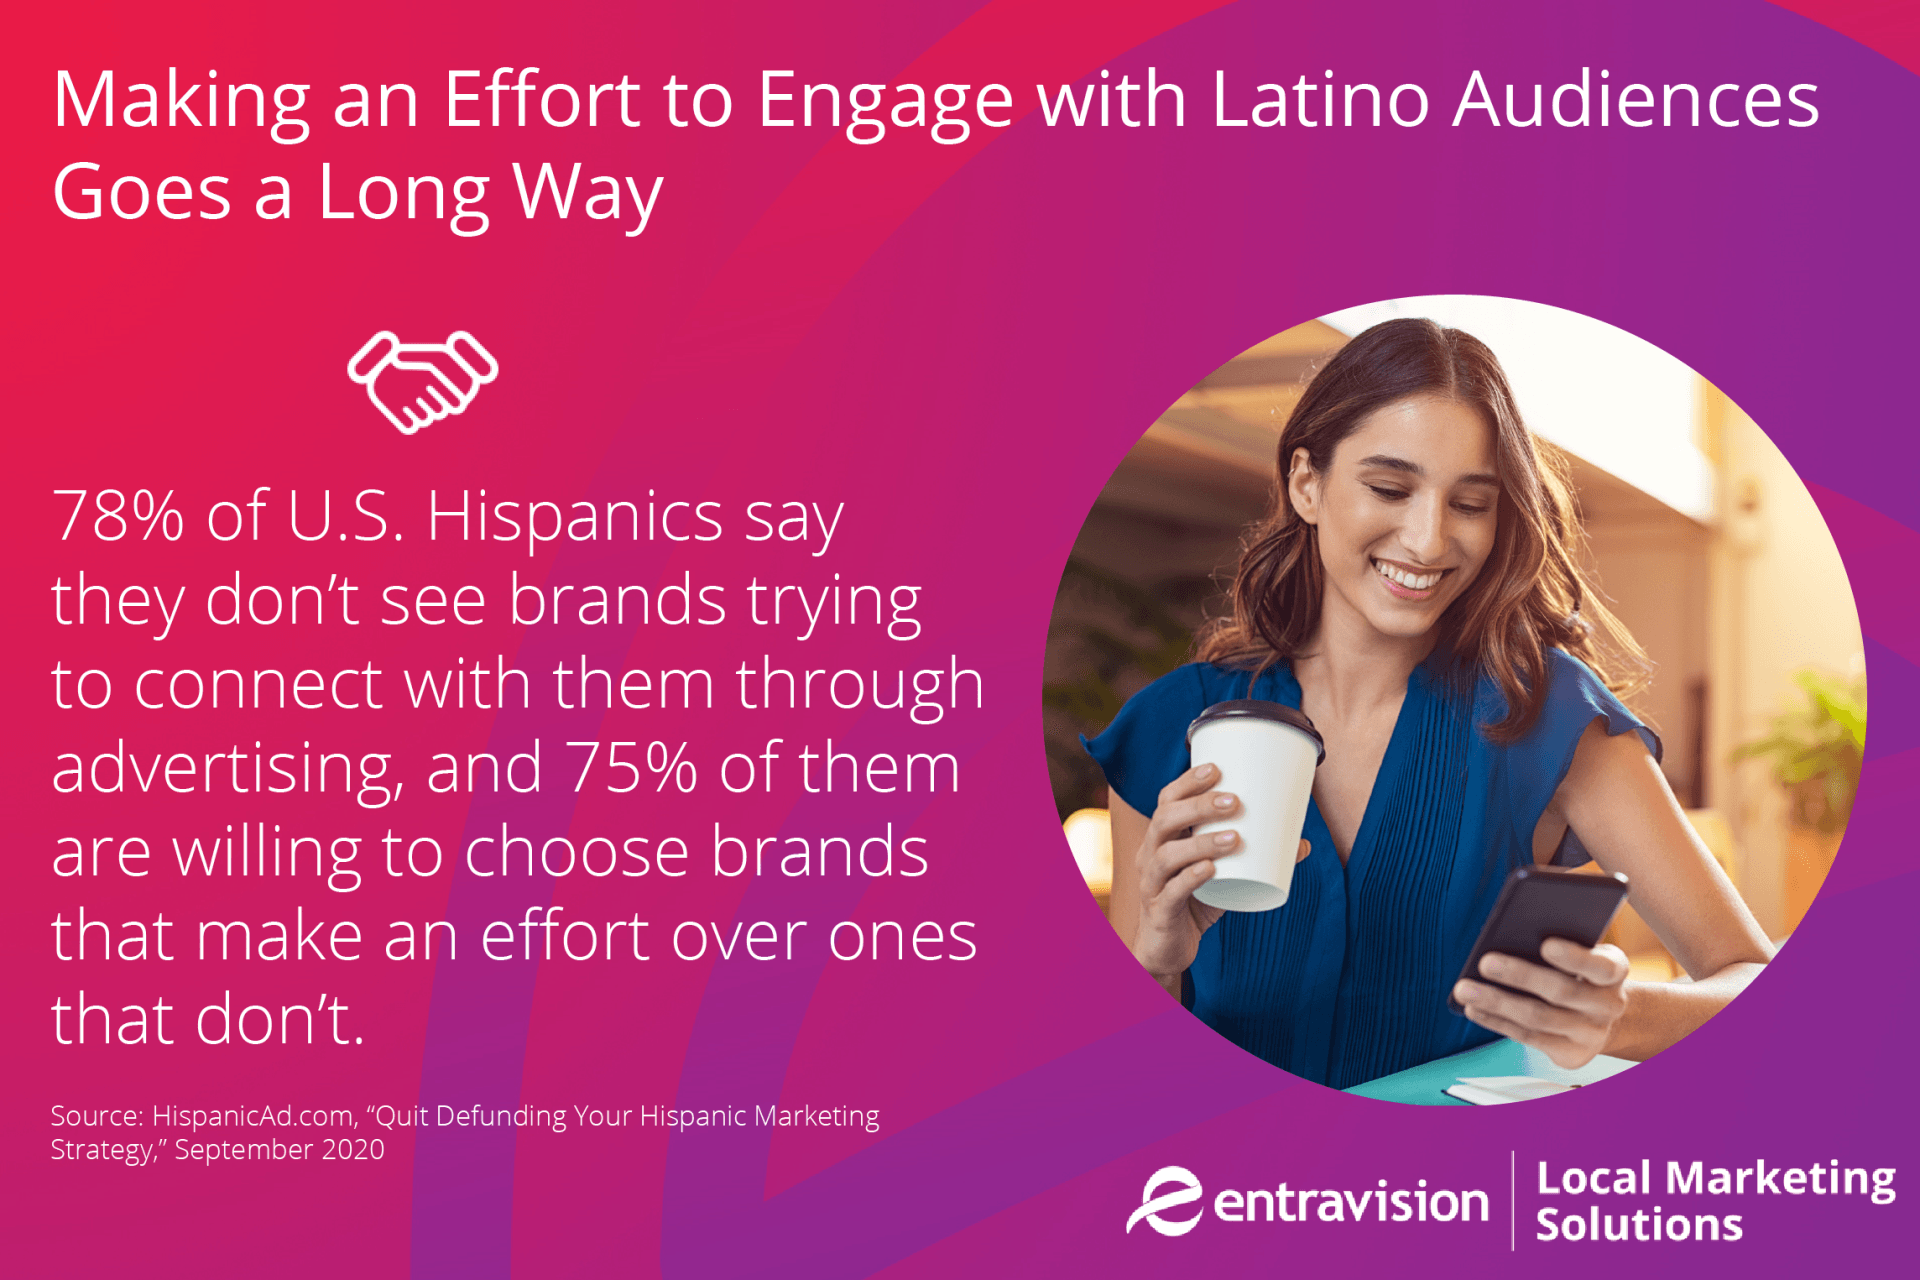 Brands who engage with Latino audiences via Hispanic marketing and inclusive ads are more likely to win their business.